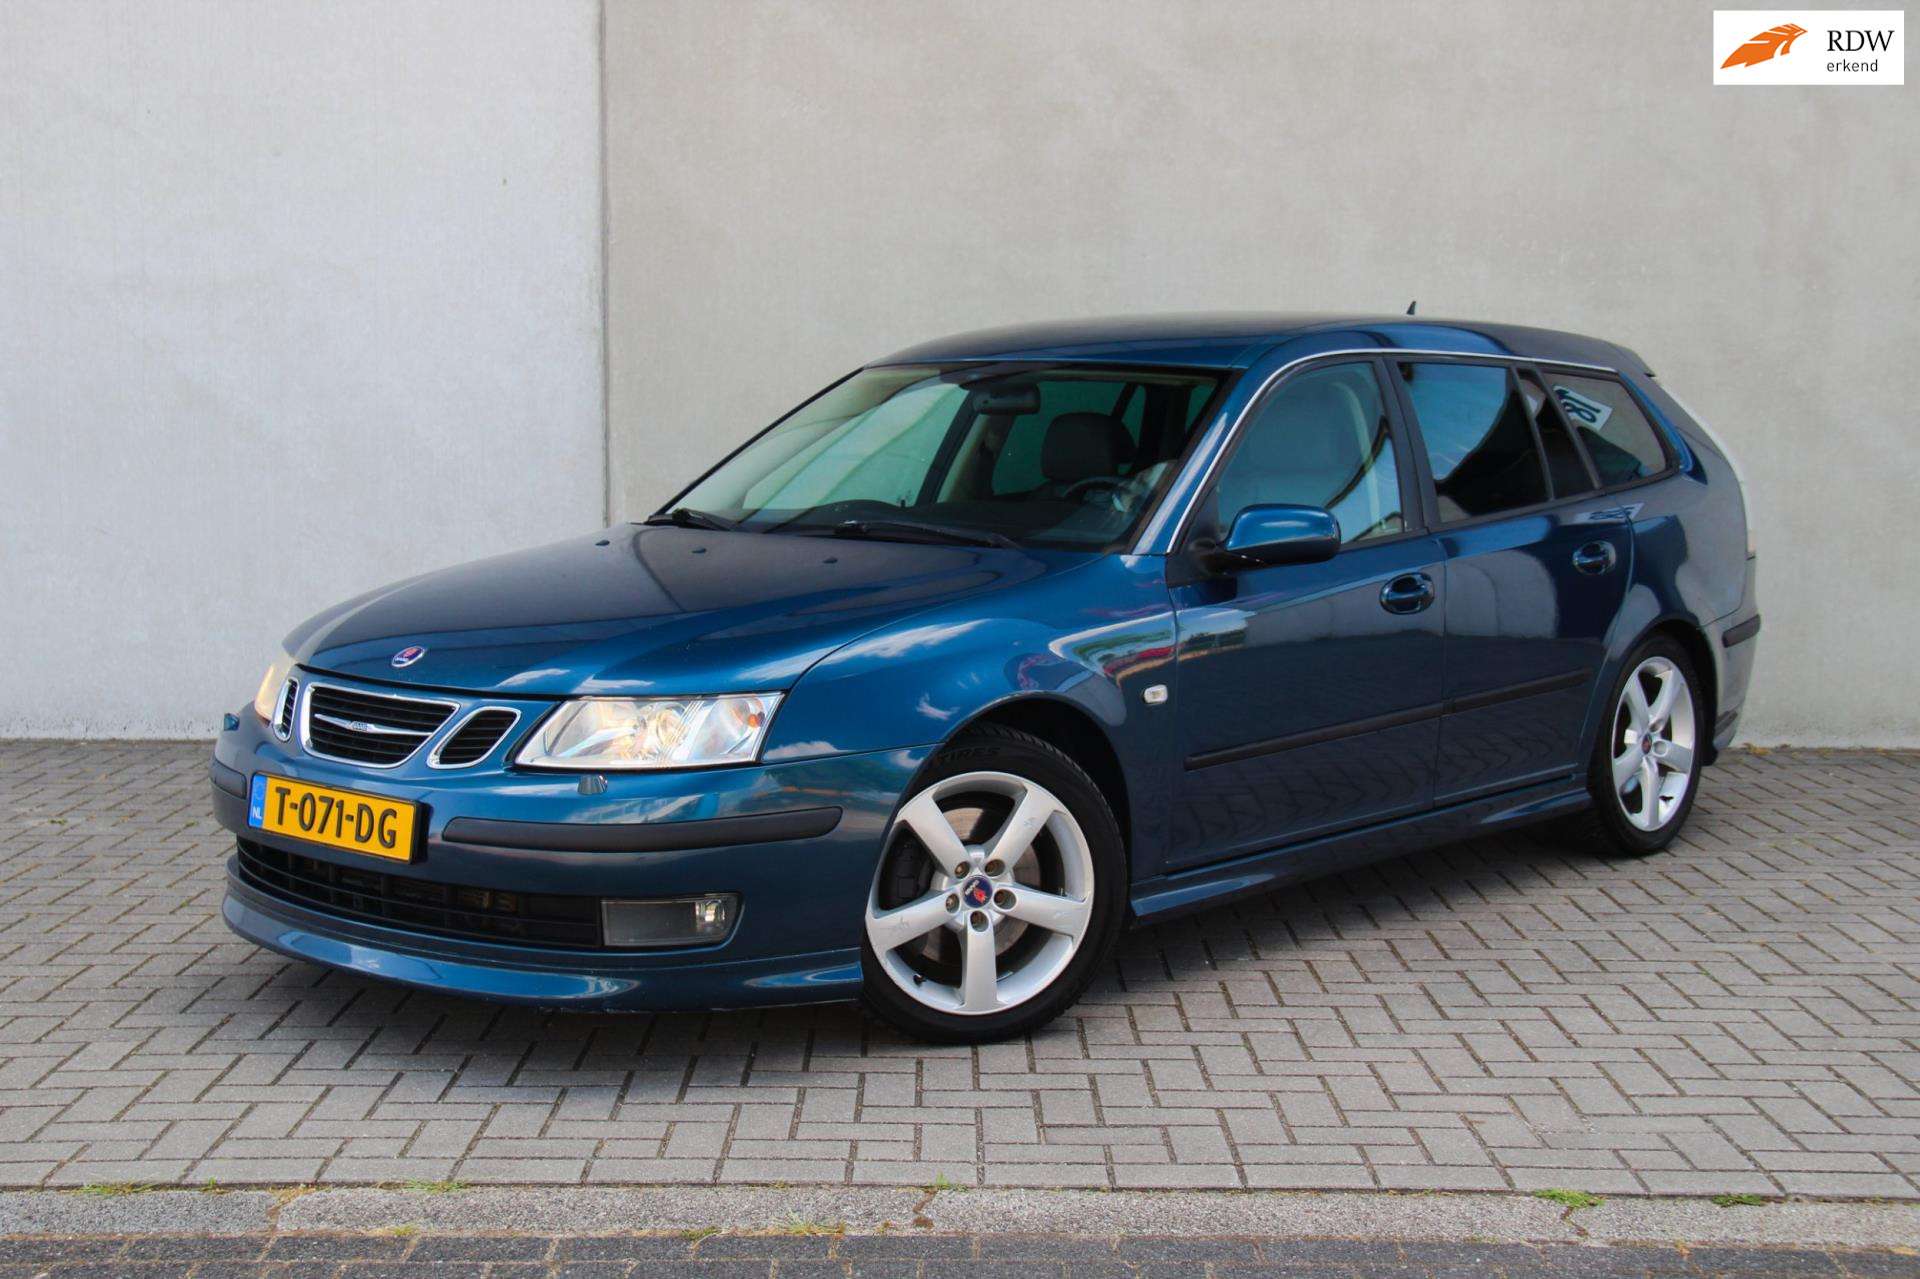 Saab 9-3 Station wagon in Blue used in APELDOORN for € 6,950.-